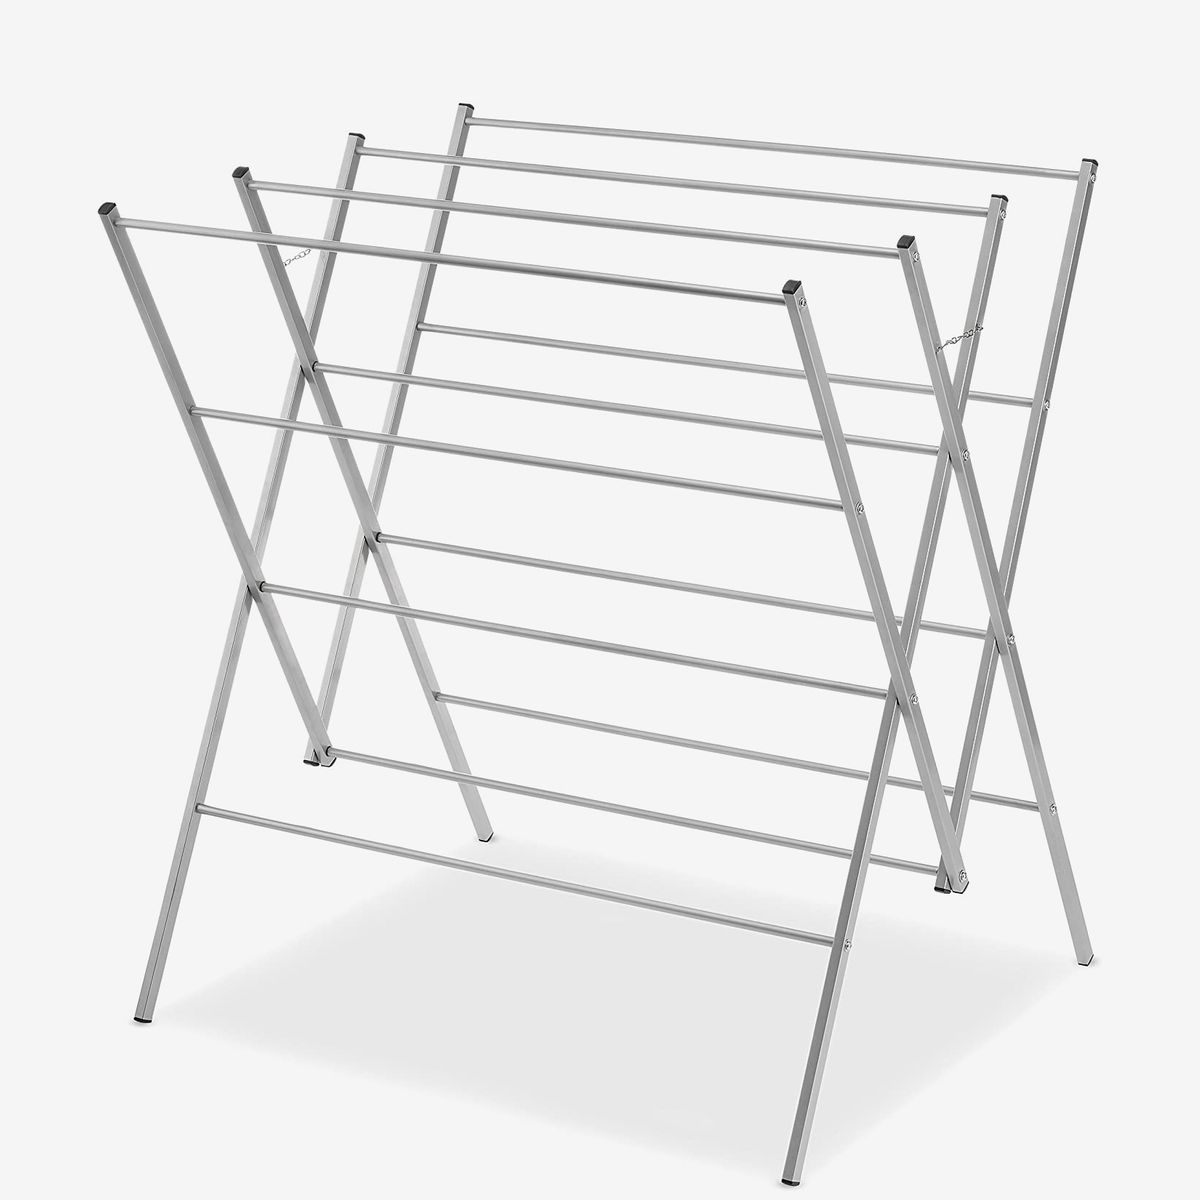 18 Best Clothes Drying Racks 2021 The, Outdoor Drying Rack